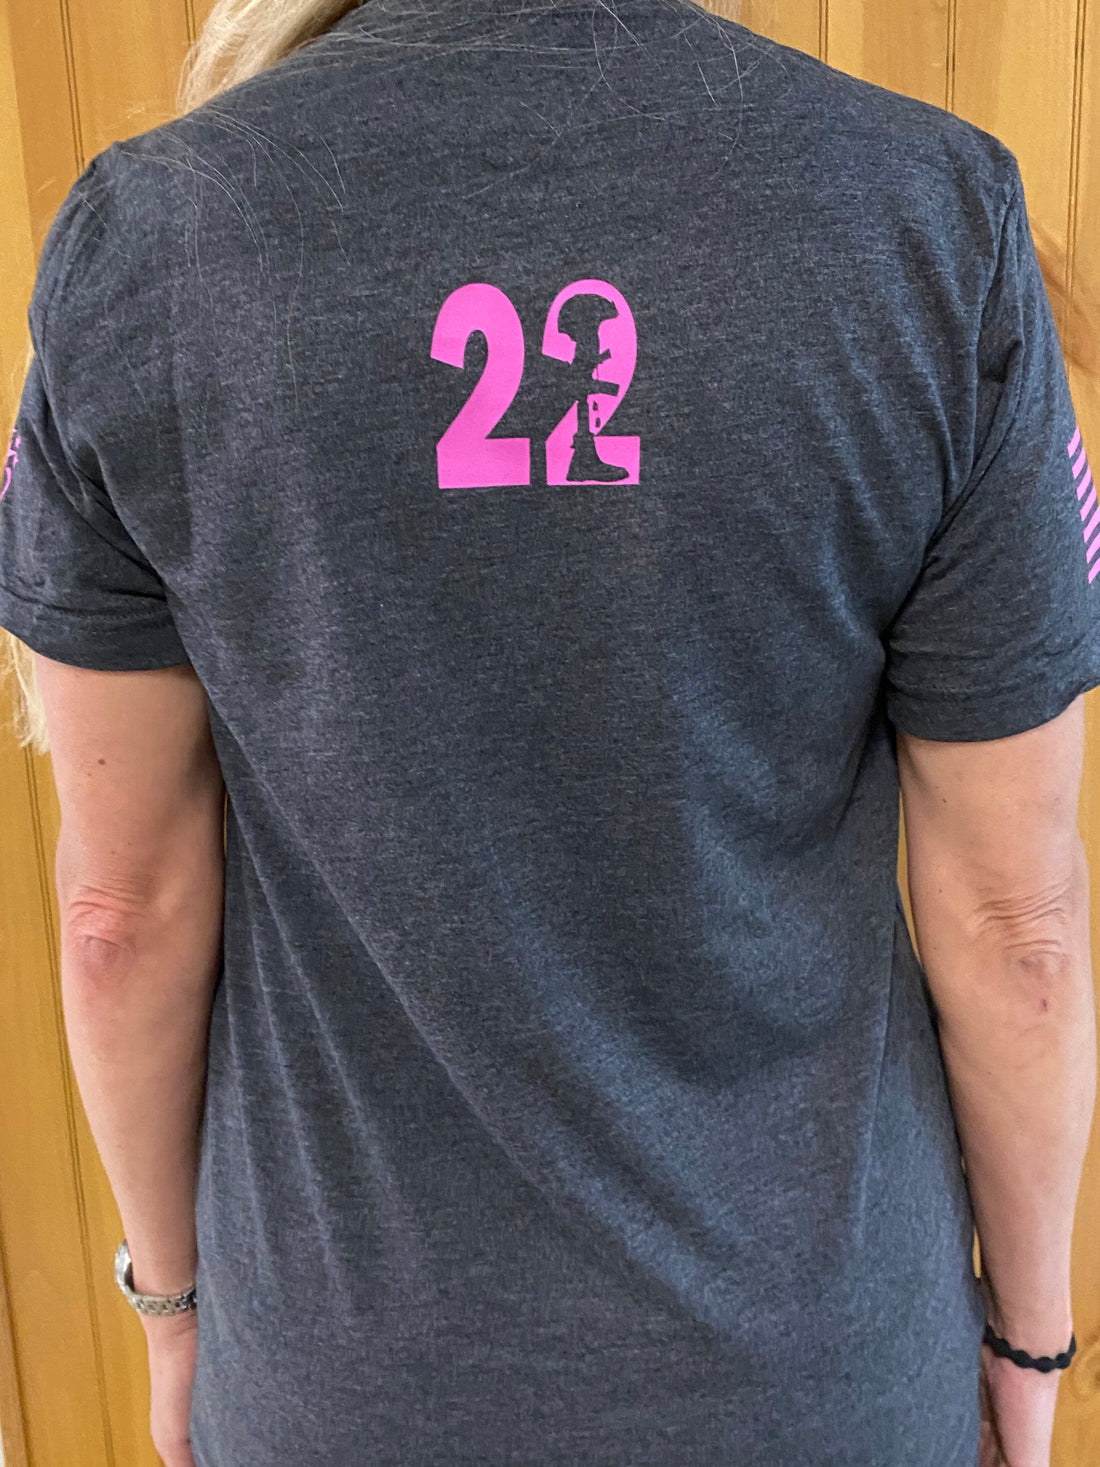 Veterans Connected / Breast Cancer Awareness Tee